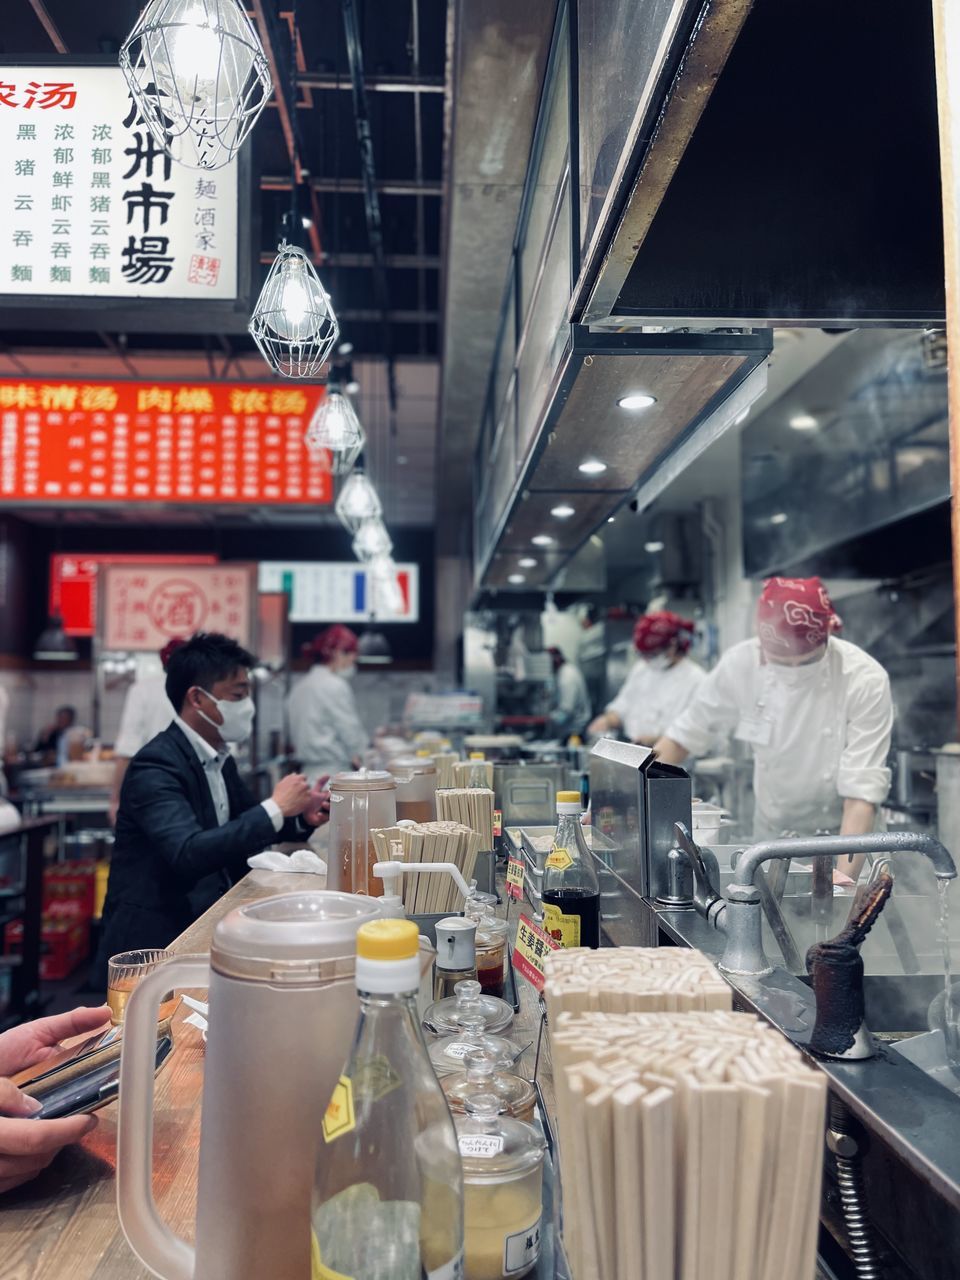 Business Food And Drink Adult Food Men Architecture Occupation City Group Of People Restaurant Working Retail  Business Finance And Industry person Clothing Container Indoors  Market Communication Standing